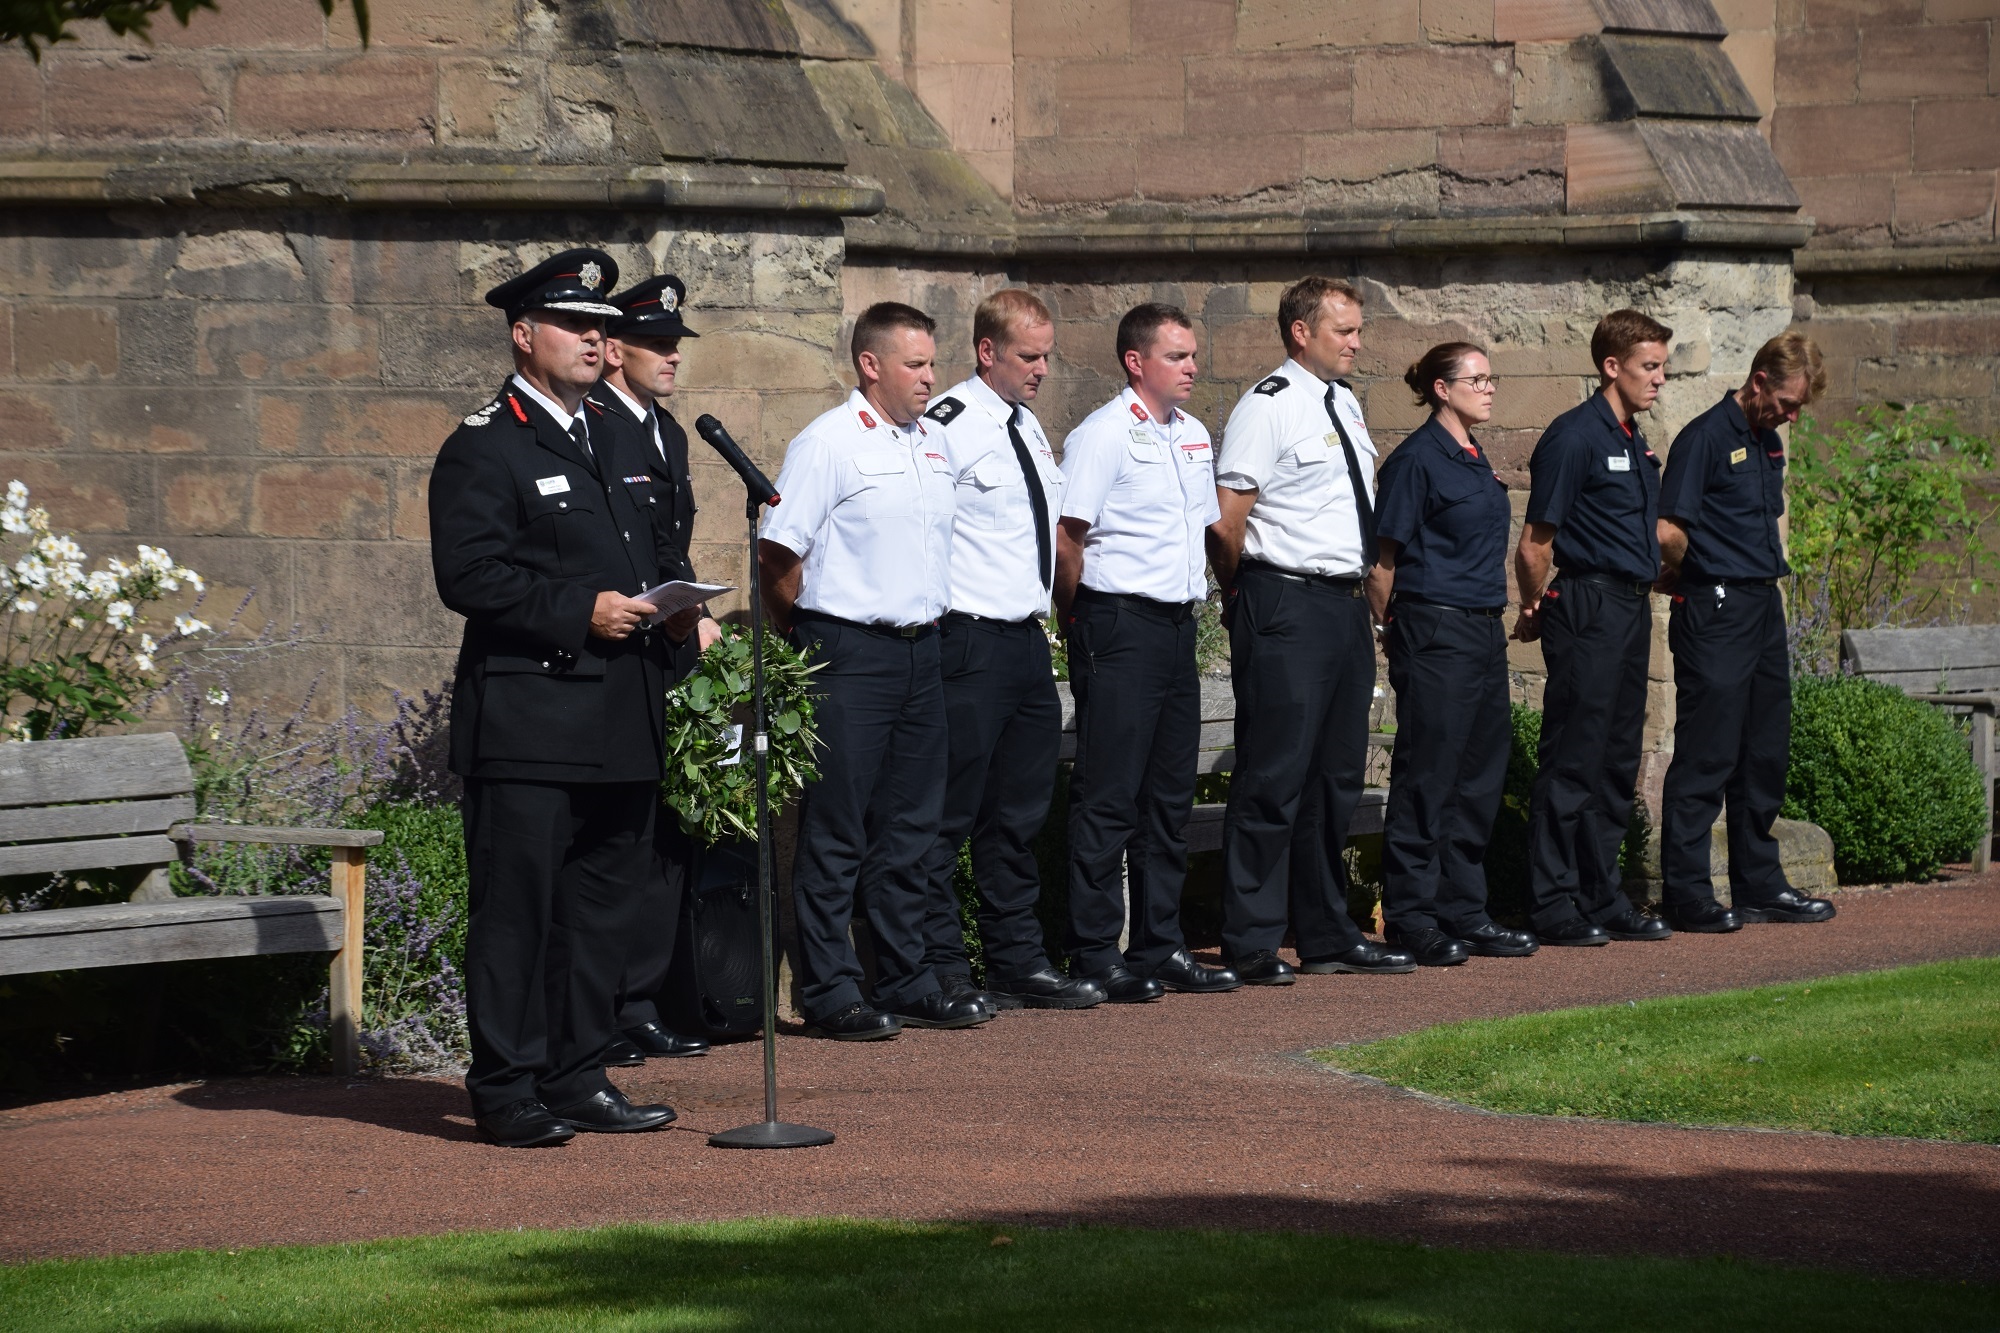 Memorial to remember hero firefighters on 30th anniversary